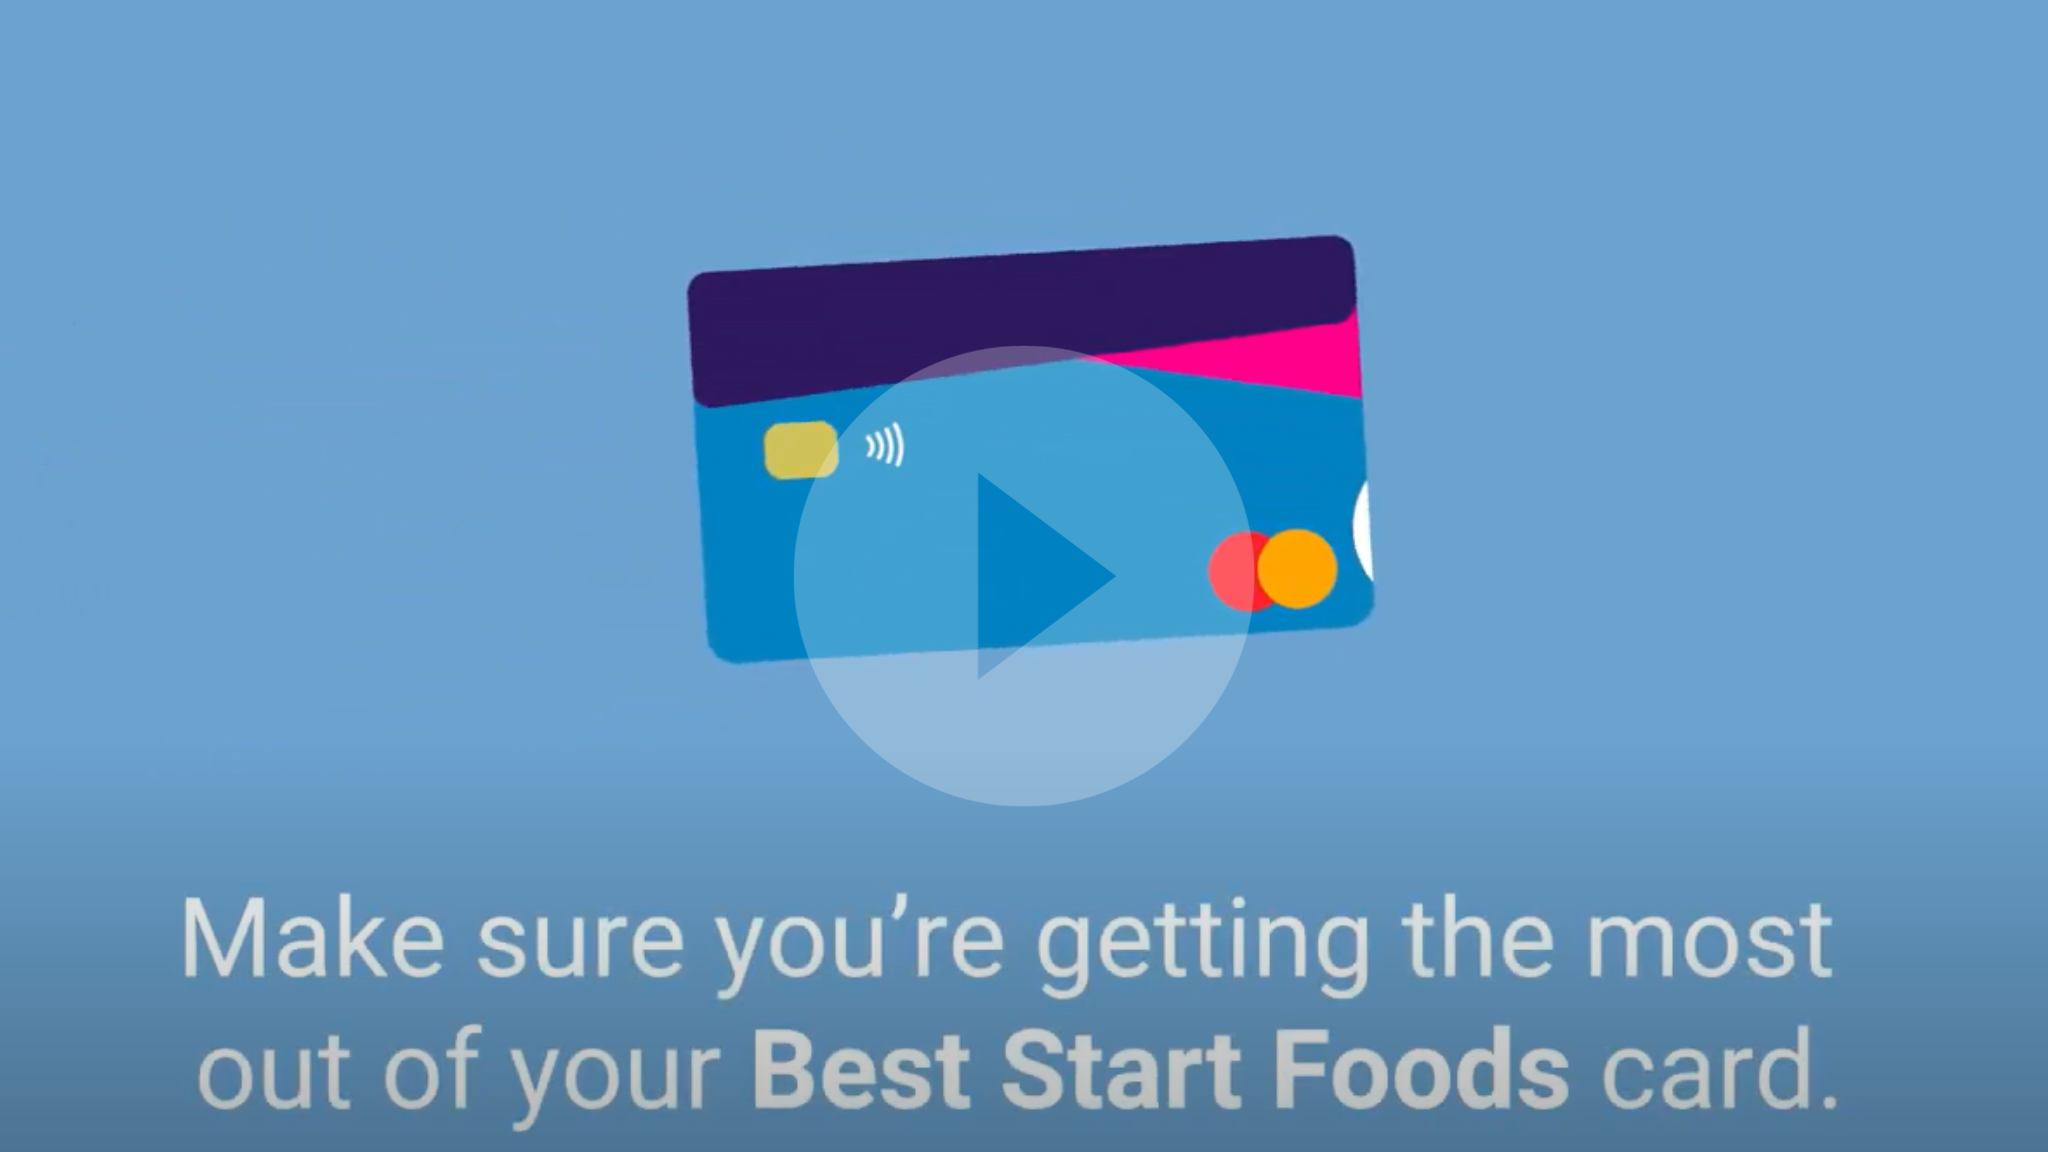 Best Start Foods | Making the most of your card